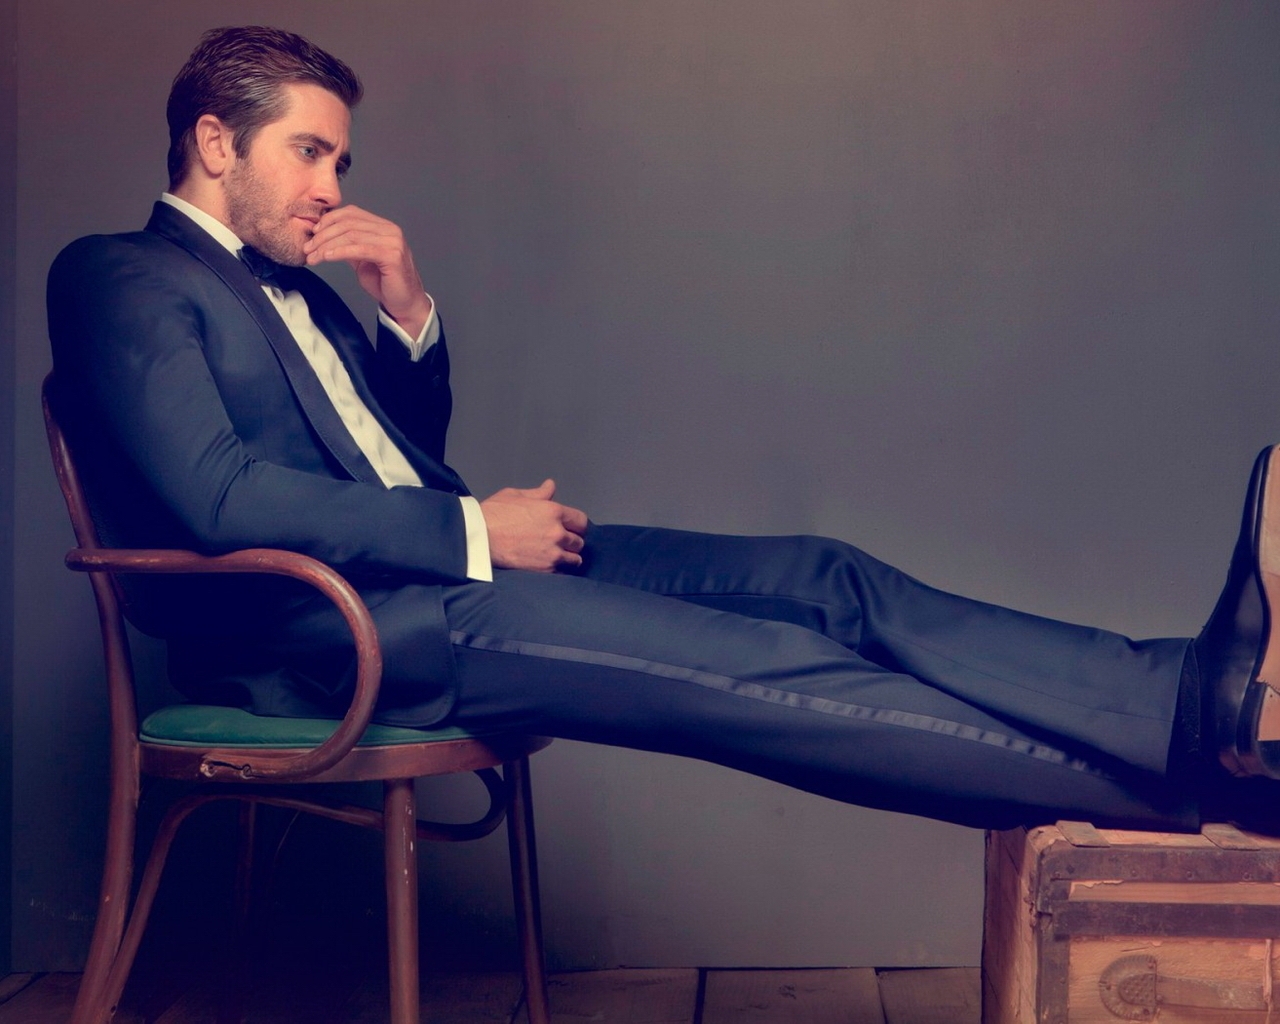 Jake Gyllenhaal Thoughtful for 1280 x 1024 resolution